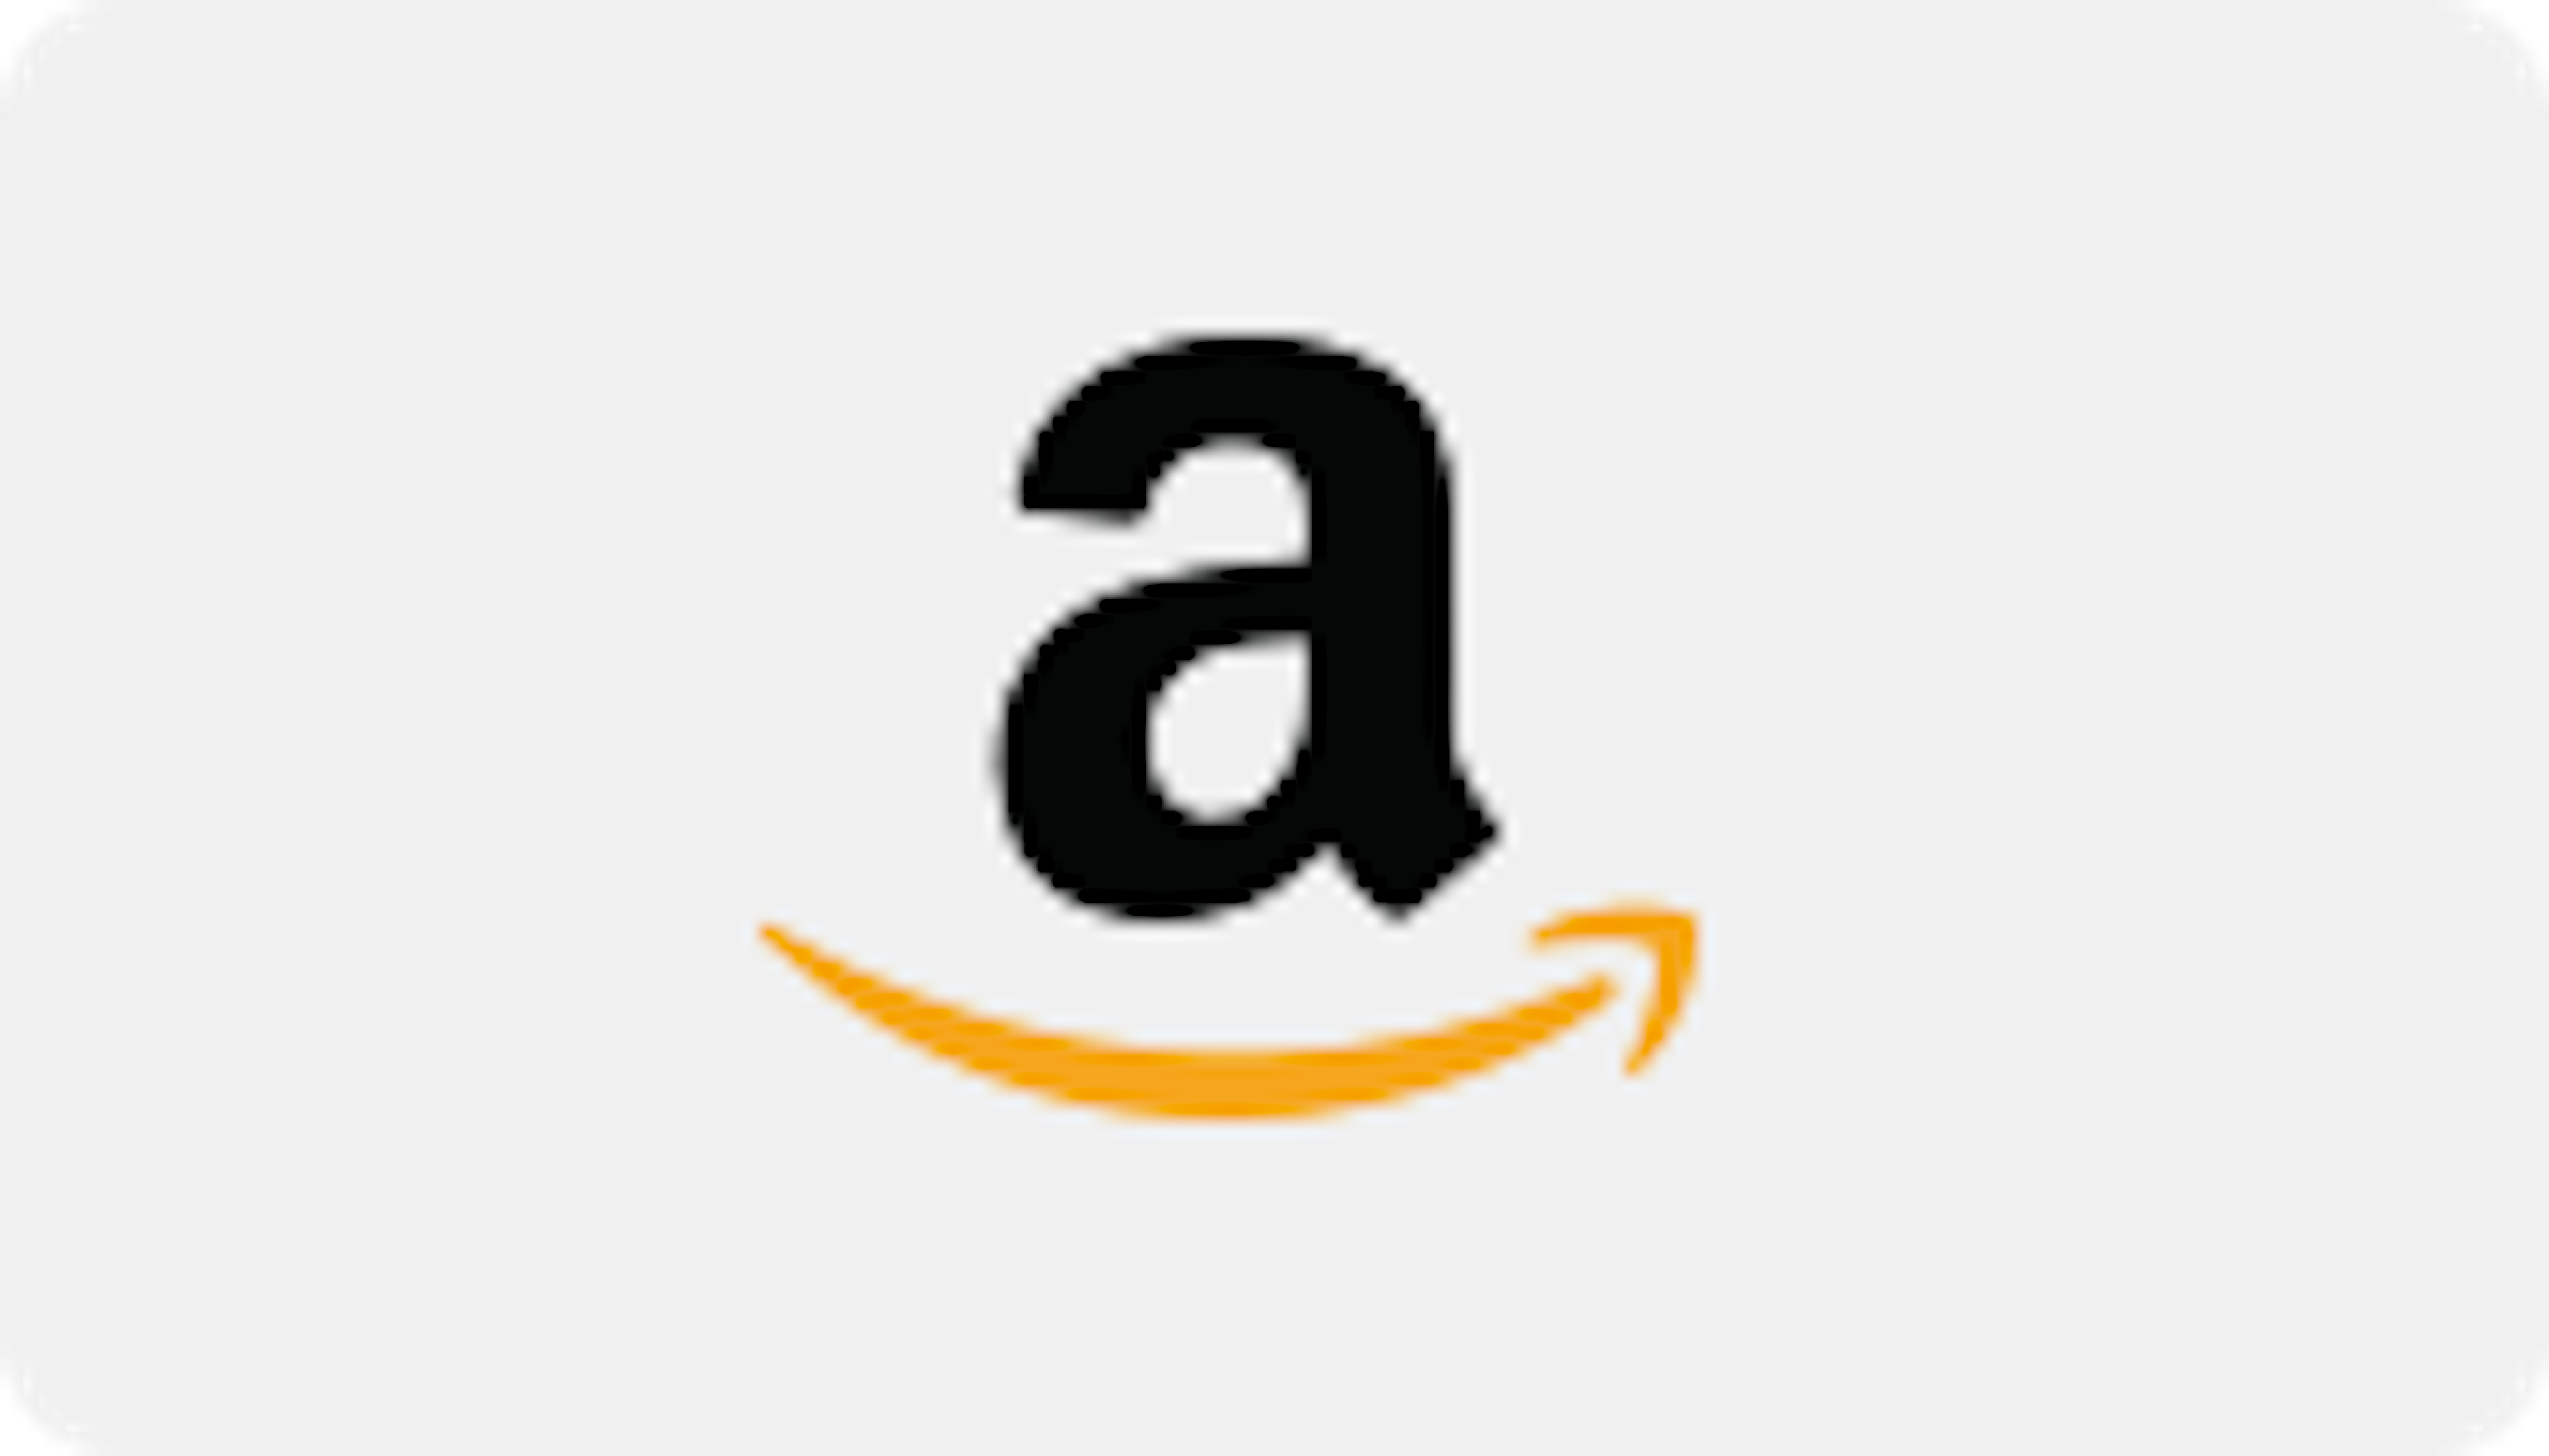 assets::badge-amazon@2x.png